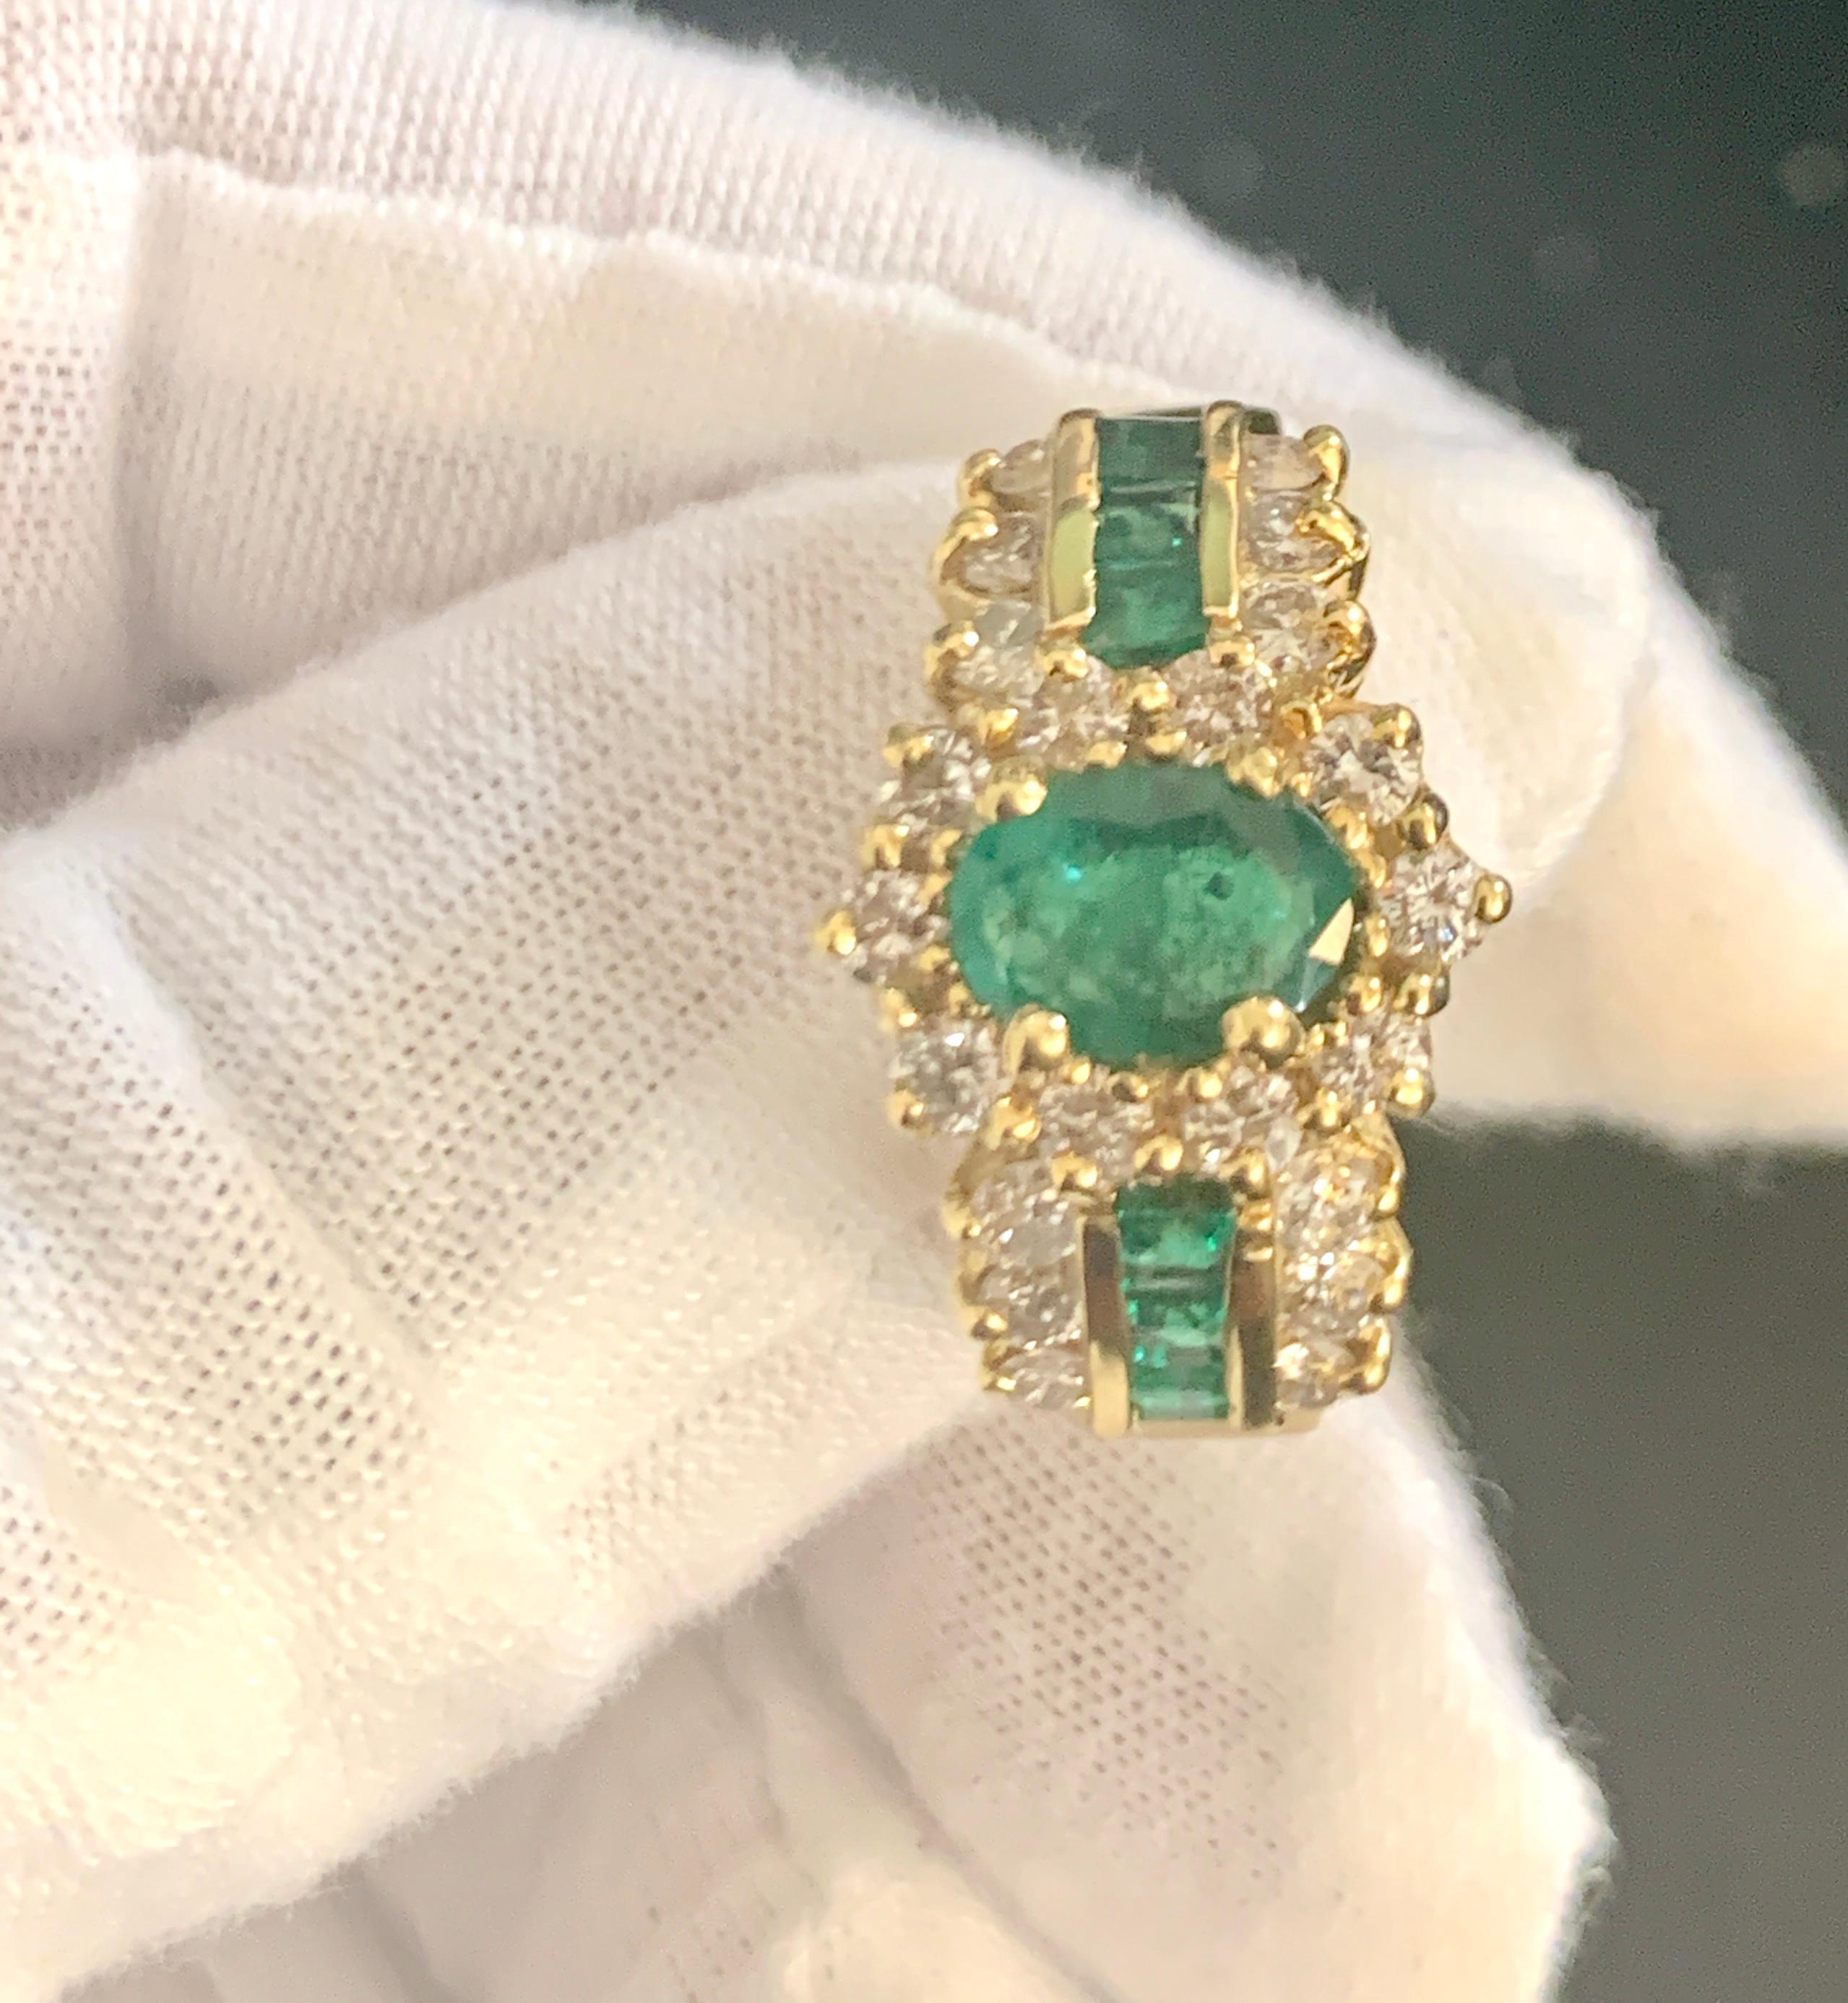 1 Carat Oval Cut Emerald and 1.0 Carat Diamond Ring 18 Karat Yellow Gold In Excellent Condition For Sale In New York, NY